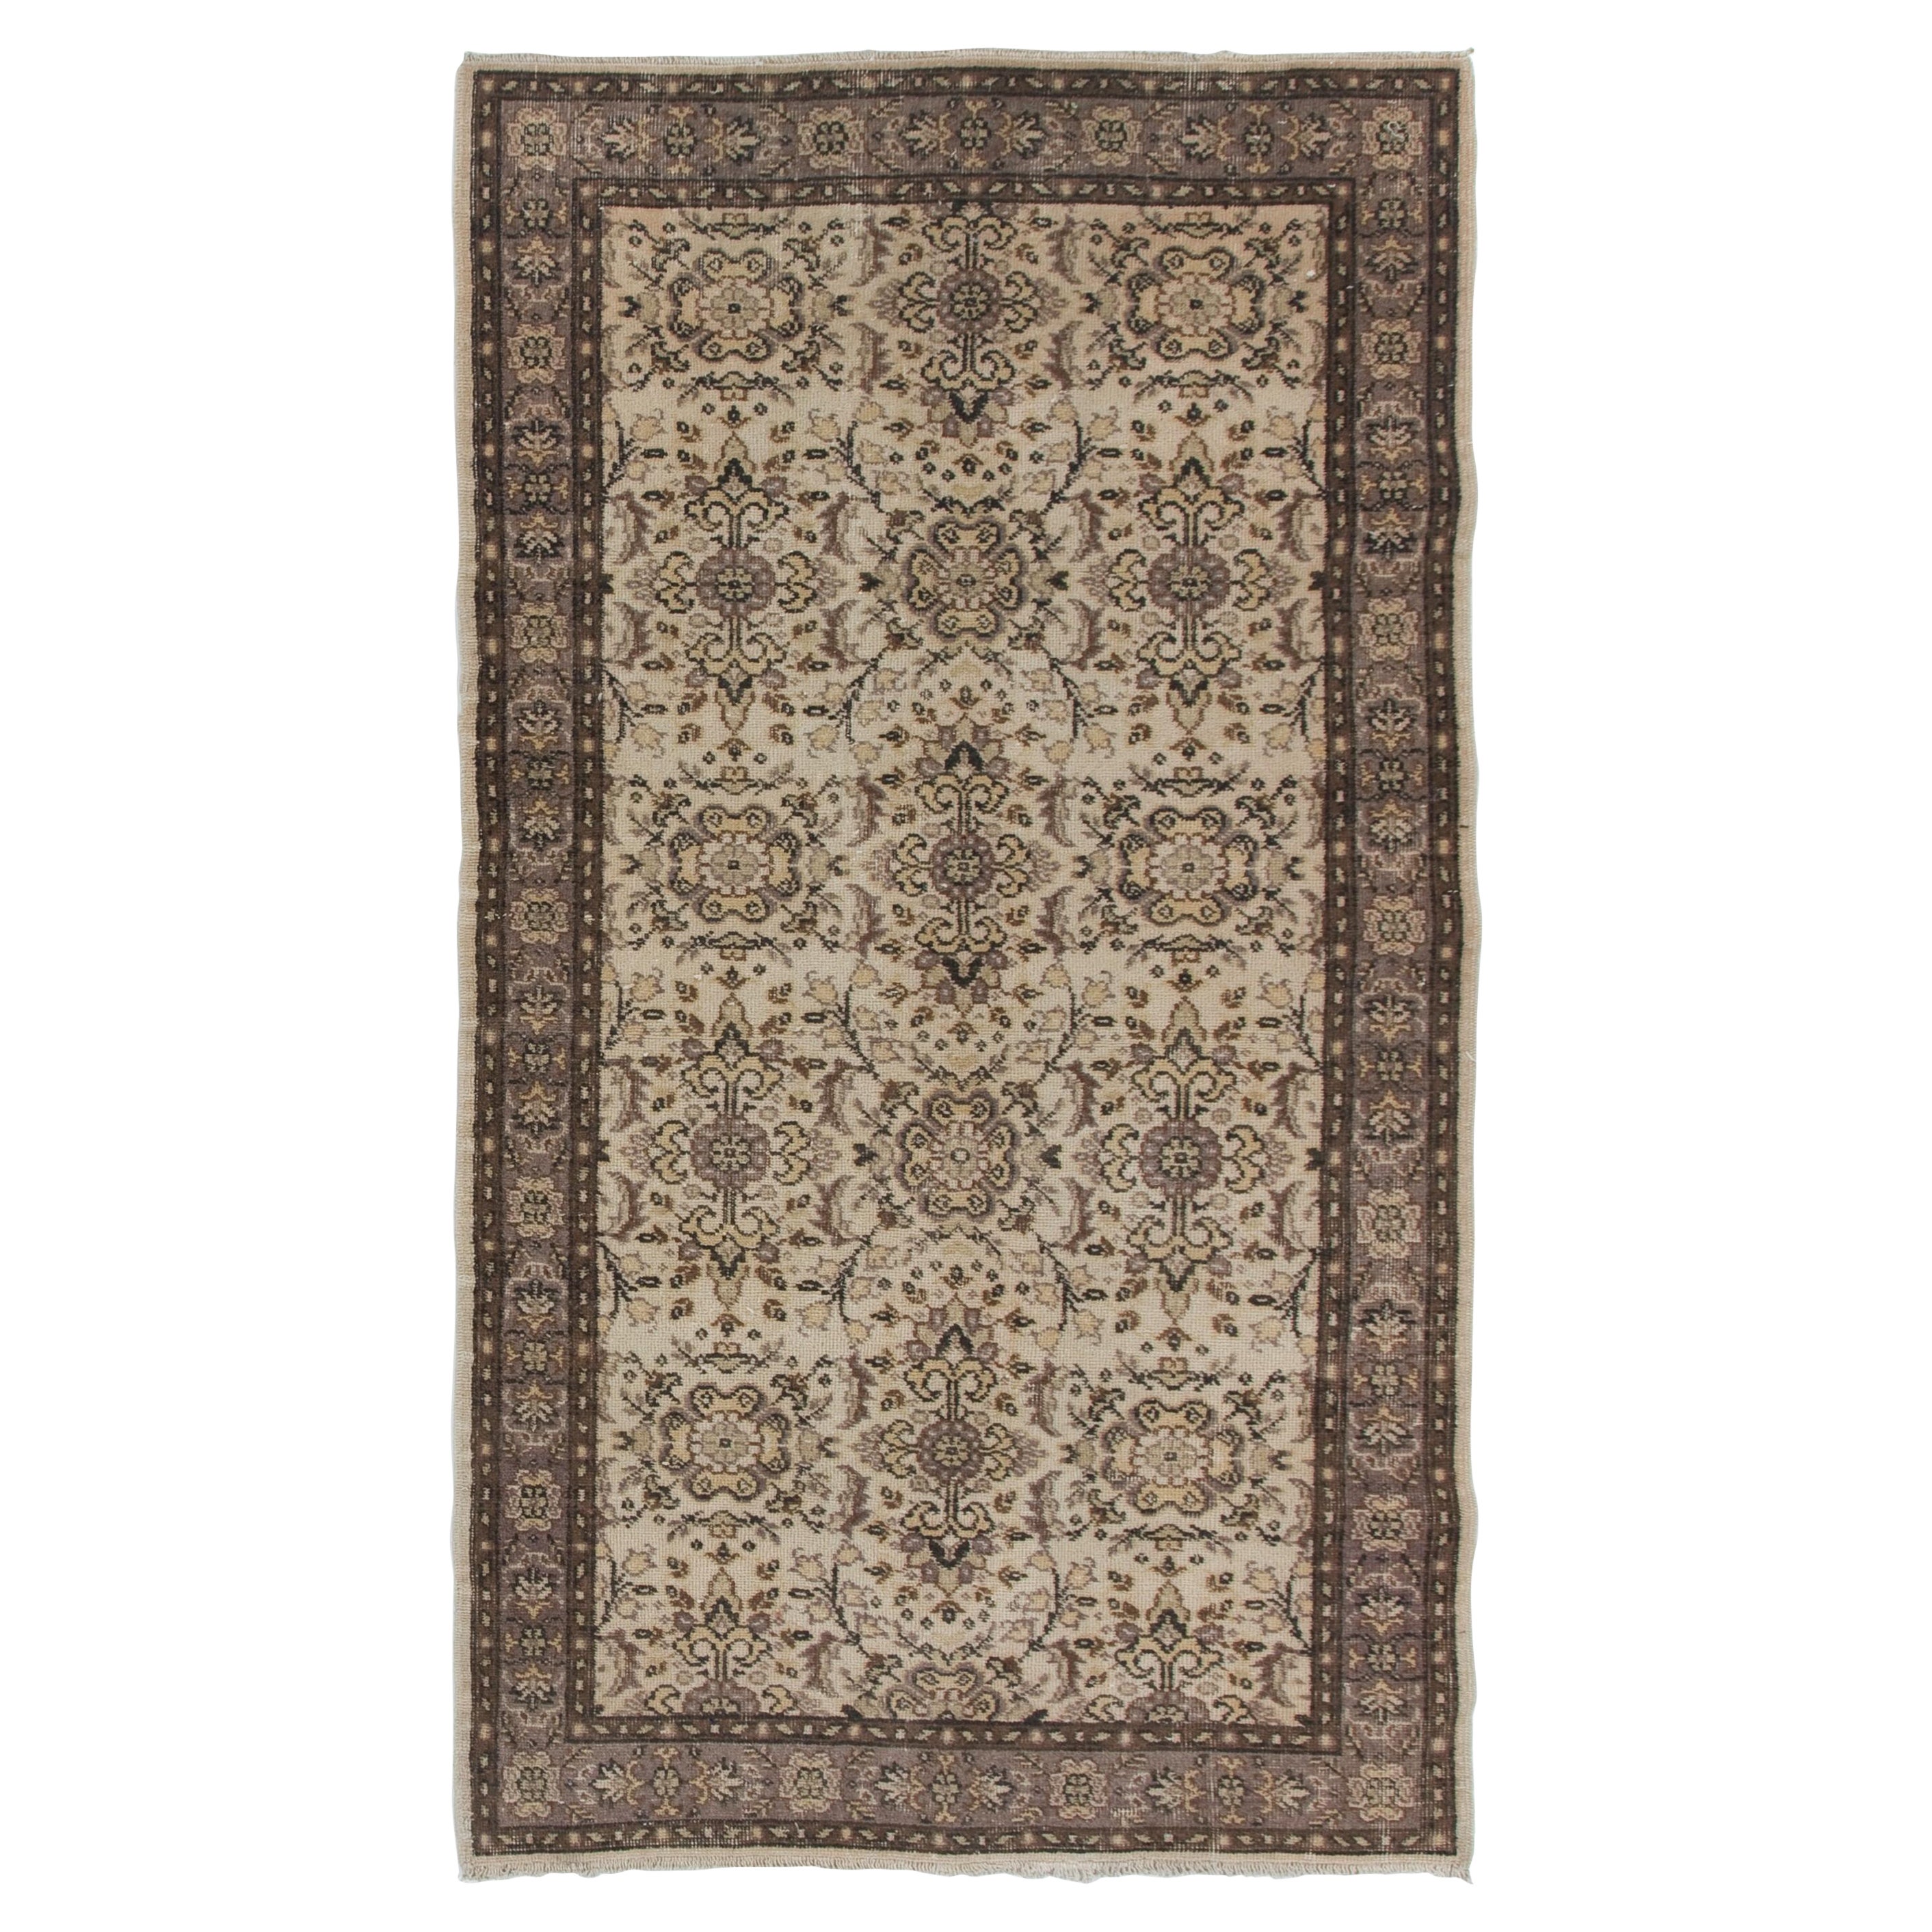 4x7 ft Handmade Mid-Century Turkish Oushak Carpet with All-Over Floral Design